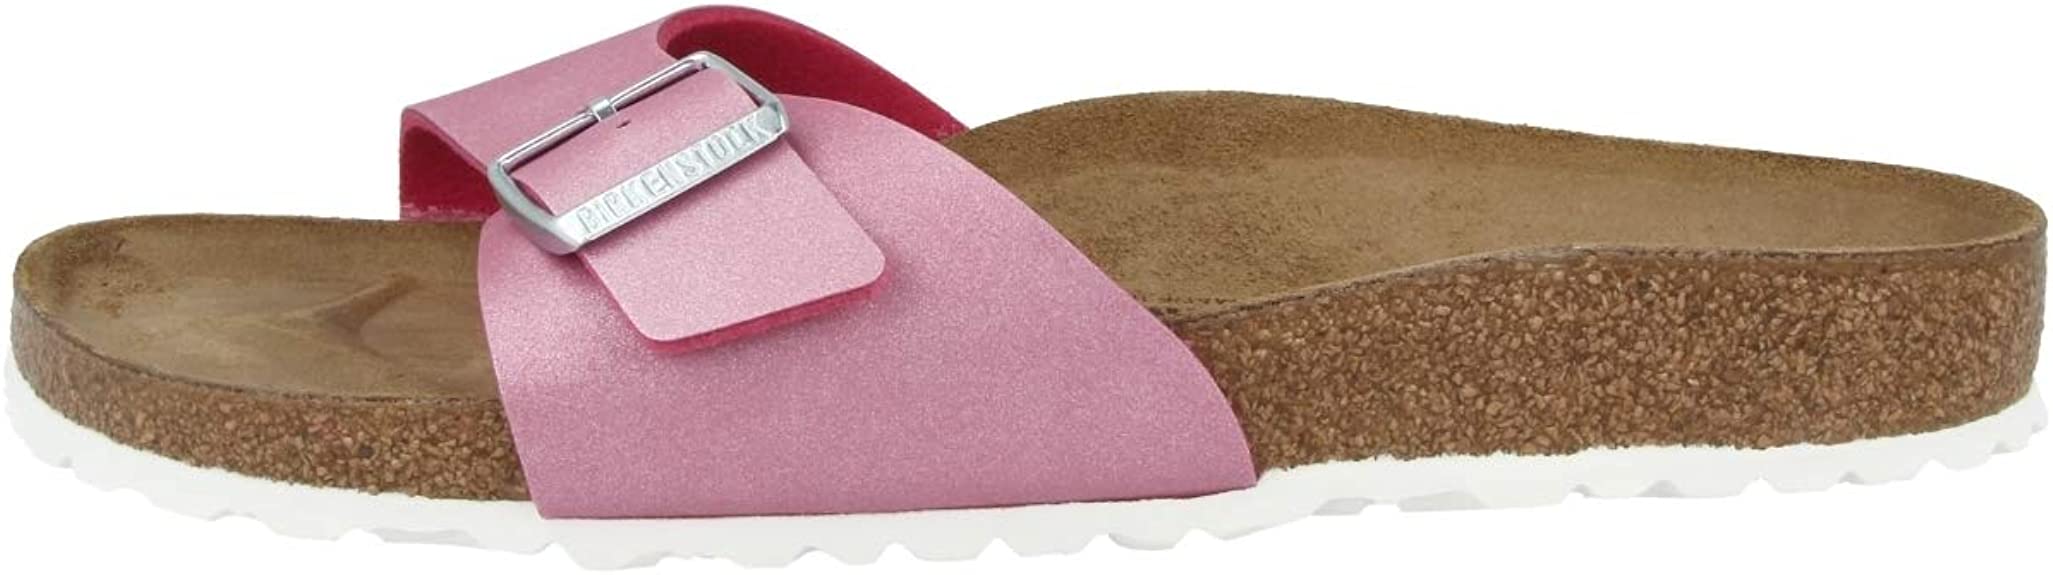 Birkenstock Madrid mules narrow pink Imitation leather / synthetic leather - Bartel-Shop